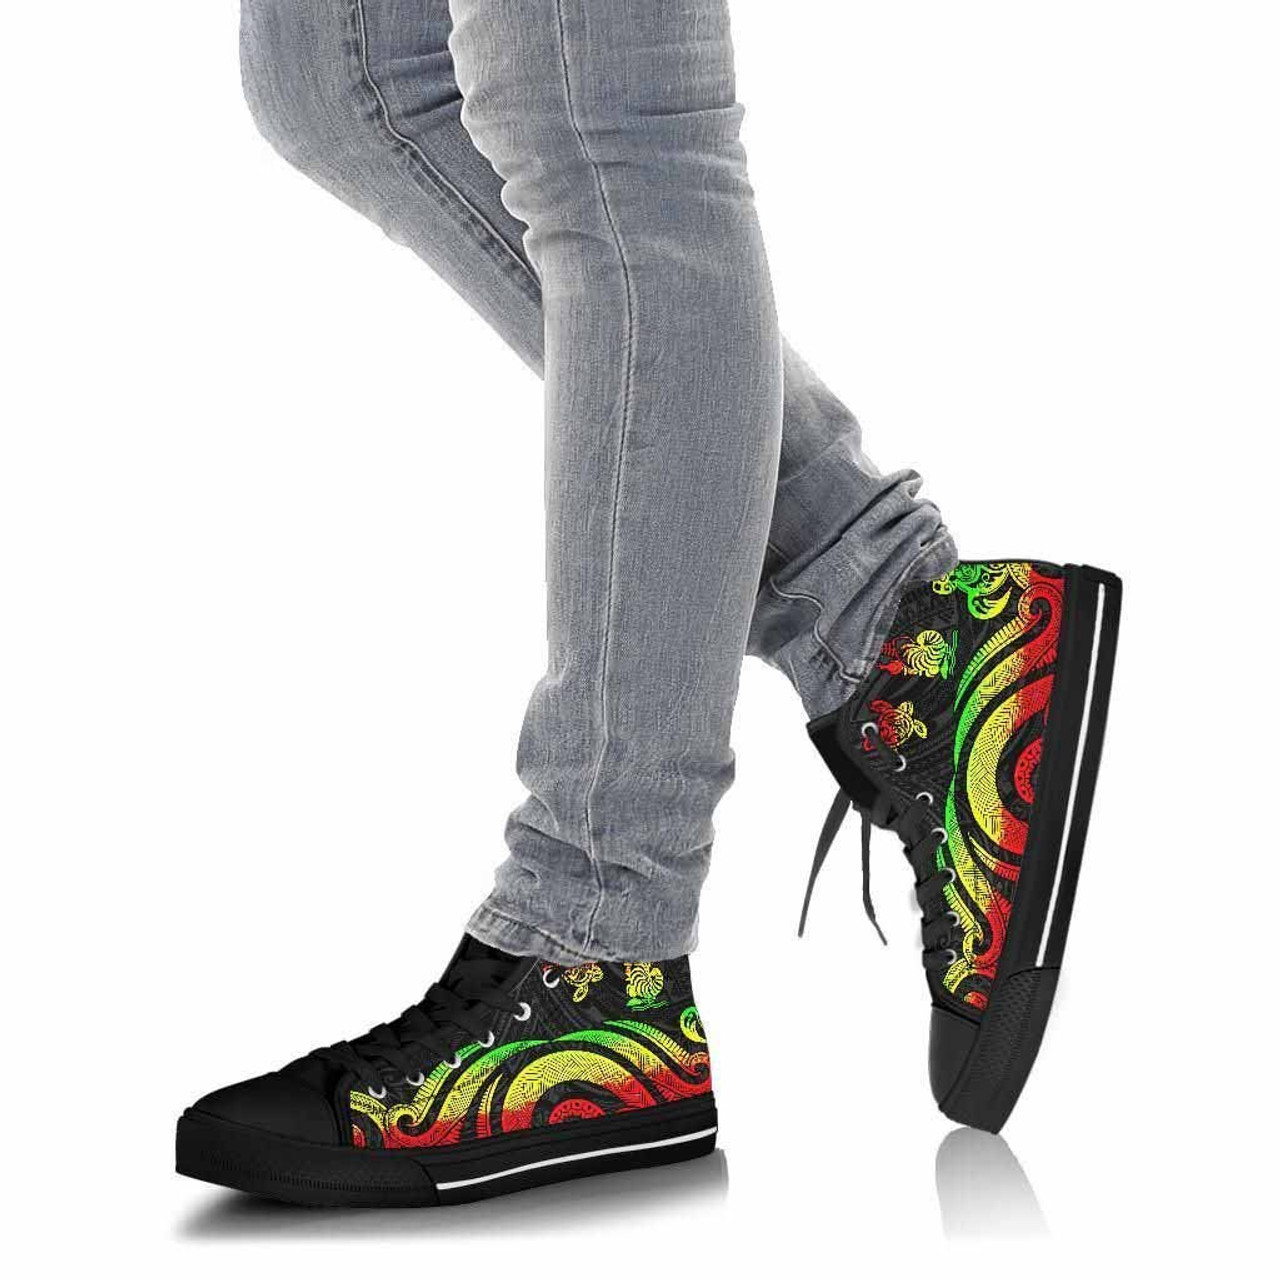 New Caledonia High Top Canvas Shoes - Reggae Tentacle Turtle 4